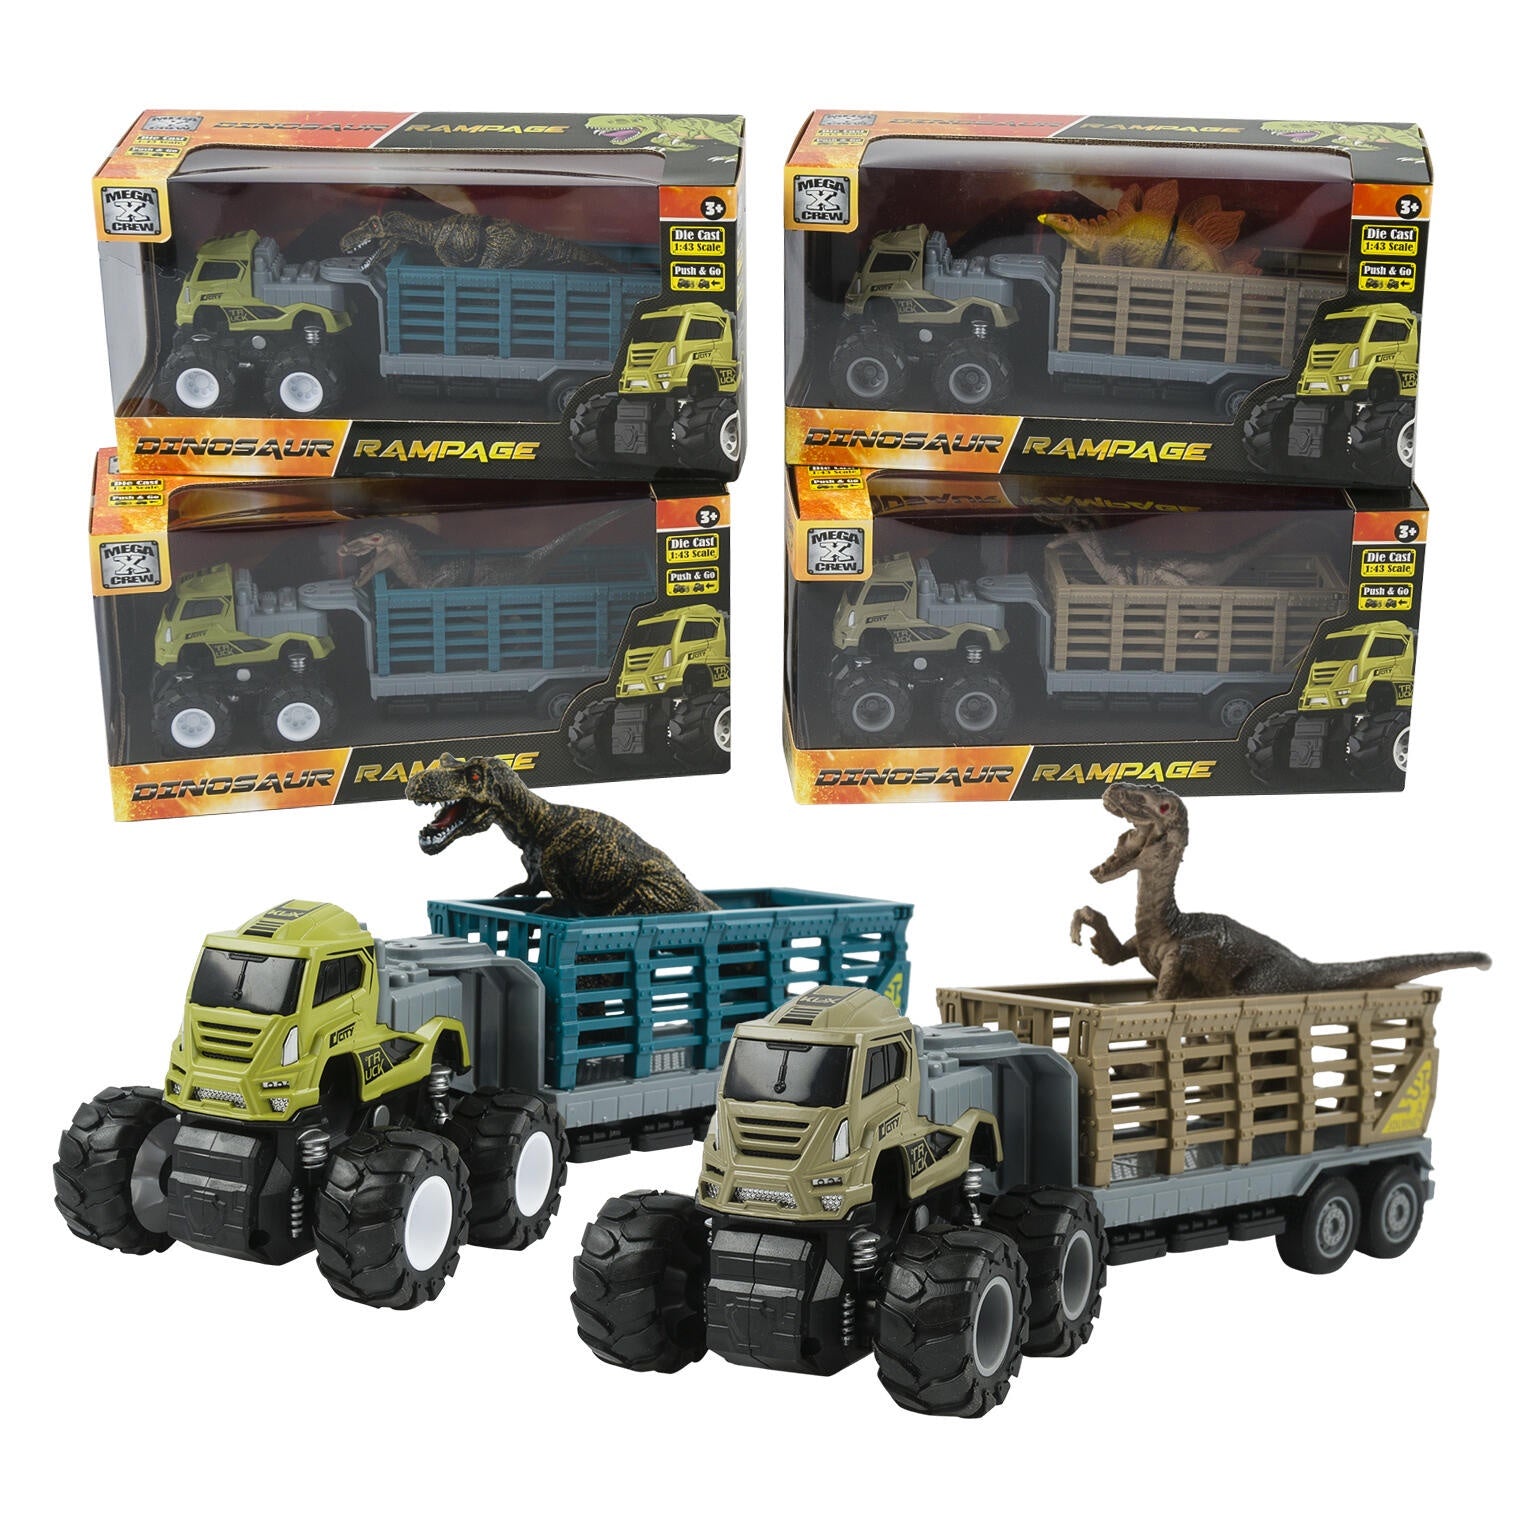 "Roaring Adventure:4WD Dinosaur Expedition Toy Truck